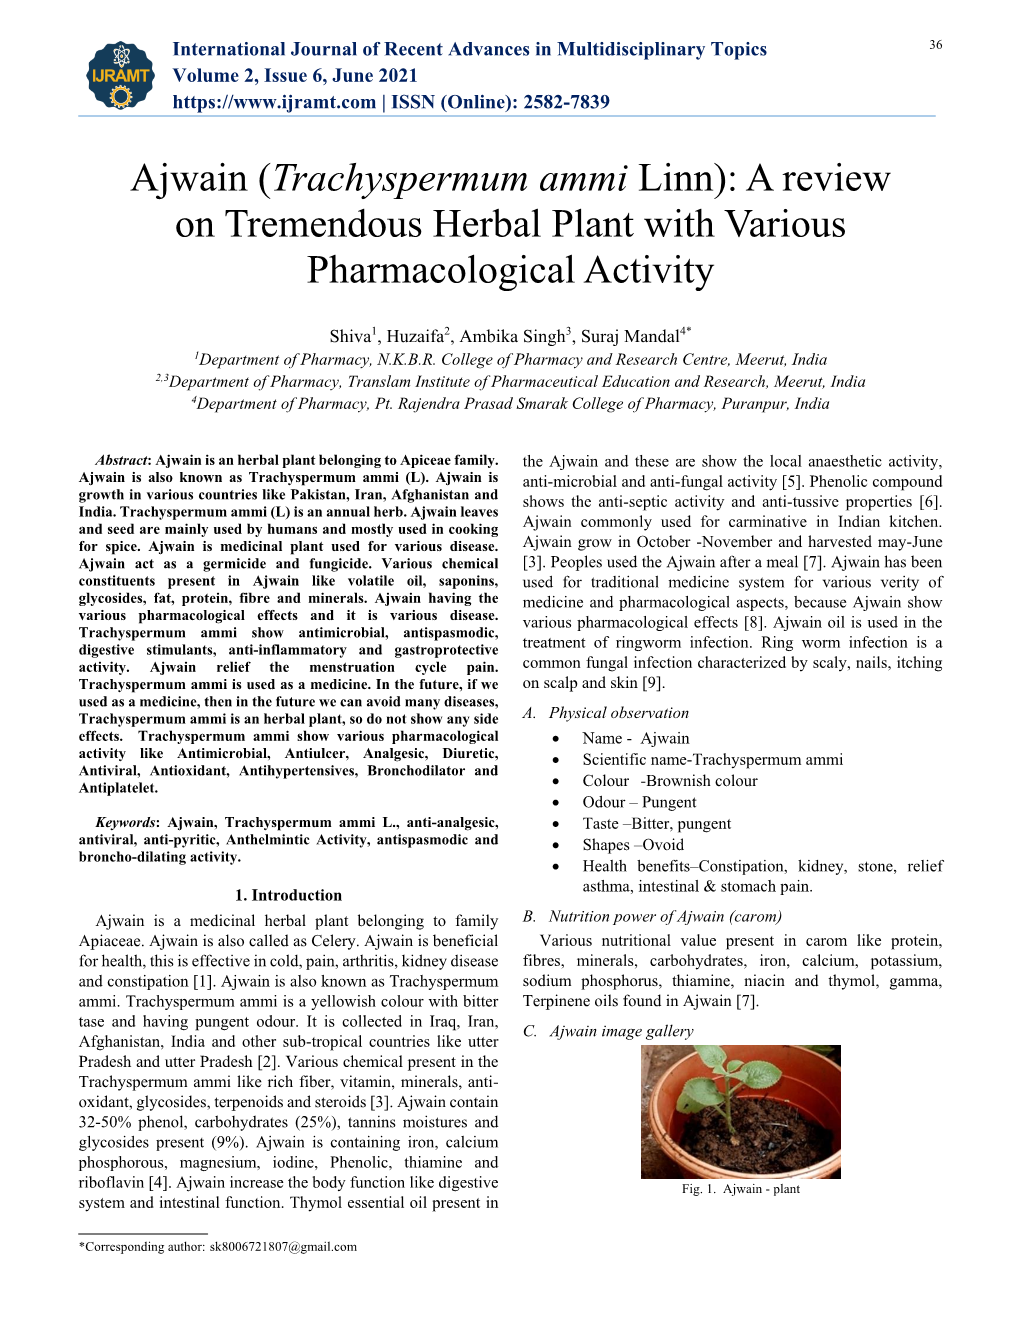 Ajwain (Trachyspermum Ammi Linn): a Review on Tremendous Herbal Plant with Various Pharmacological Activity